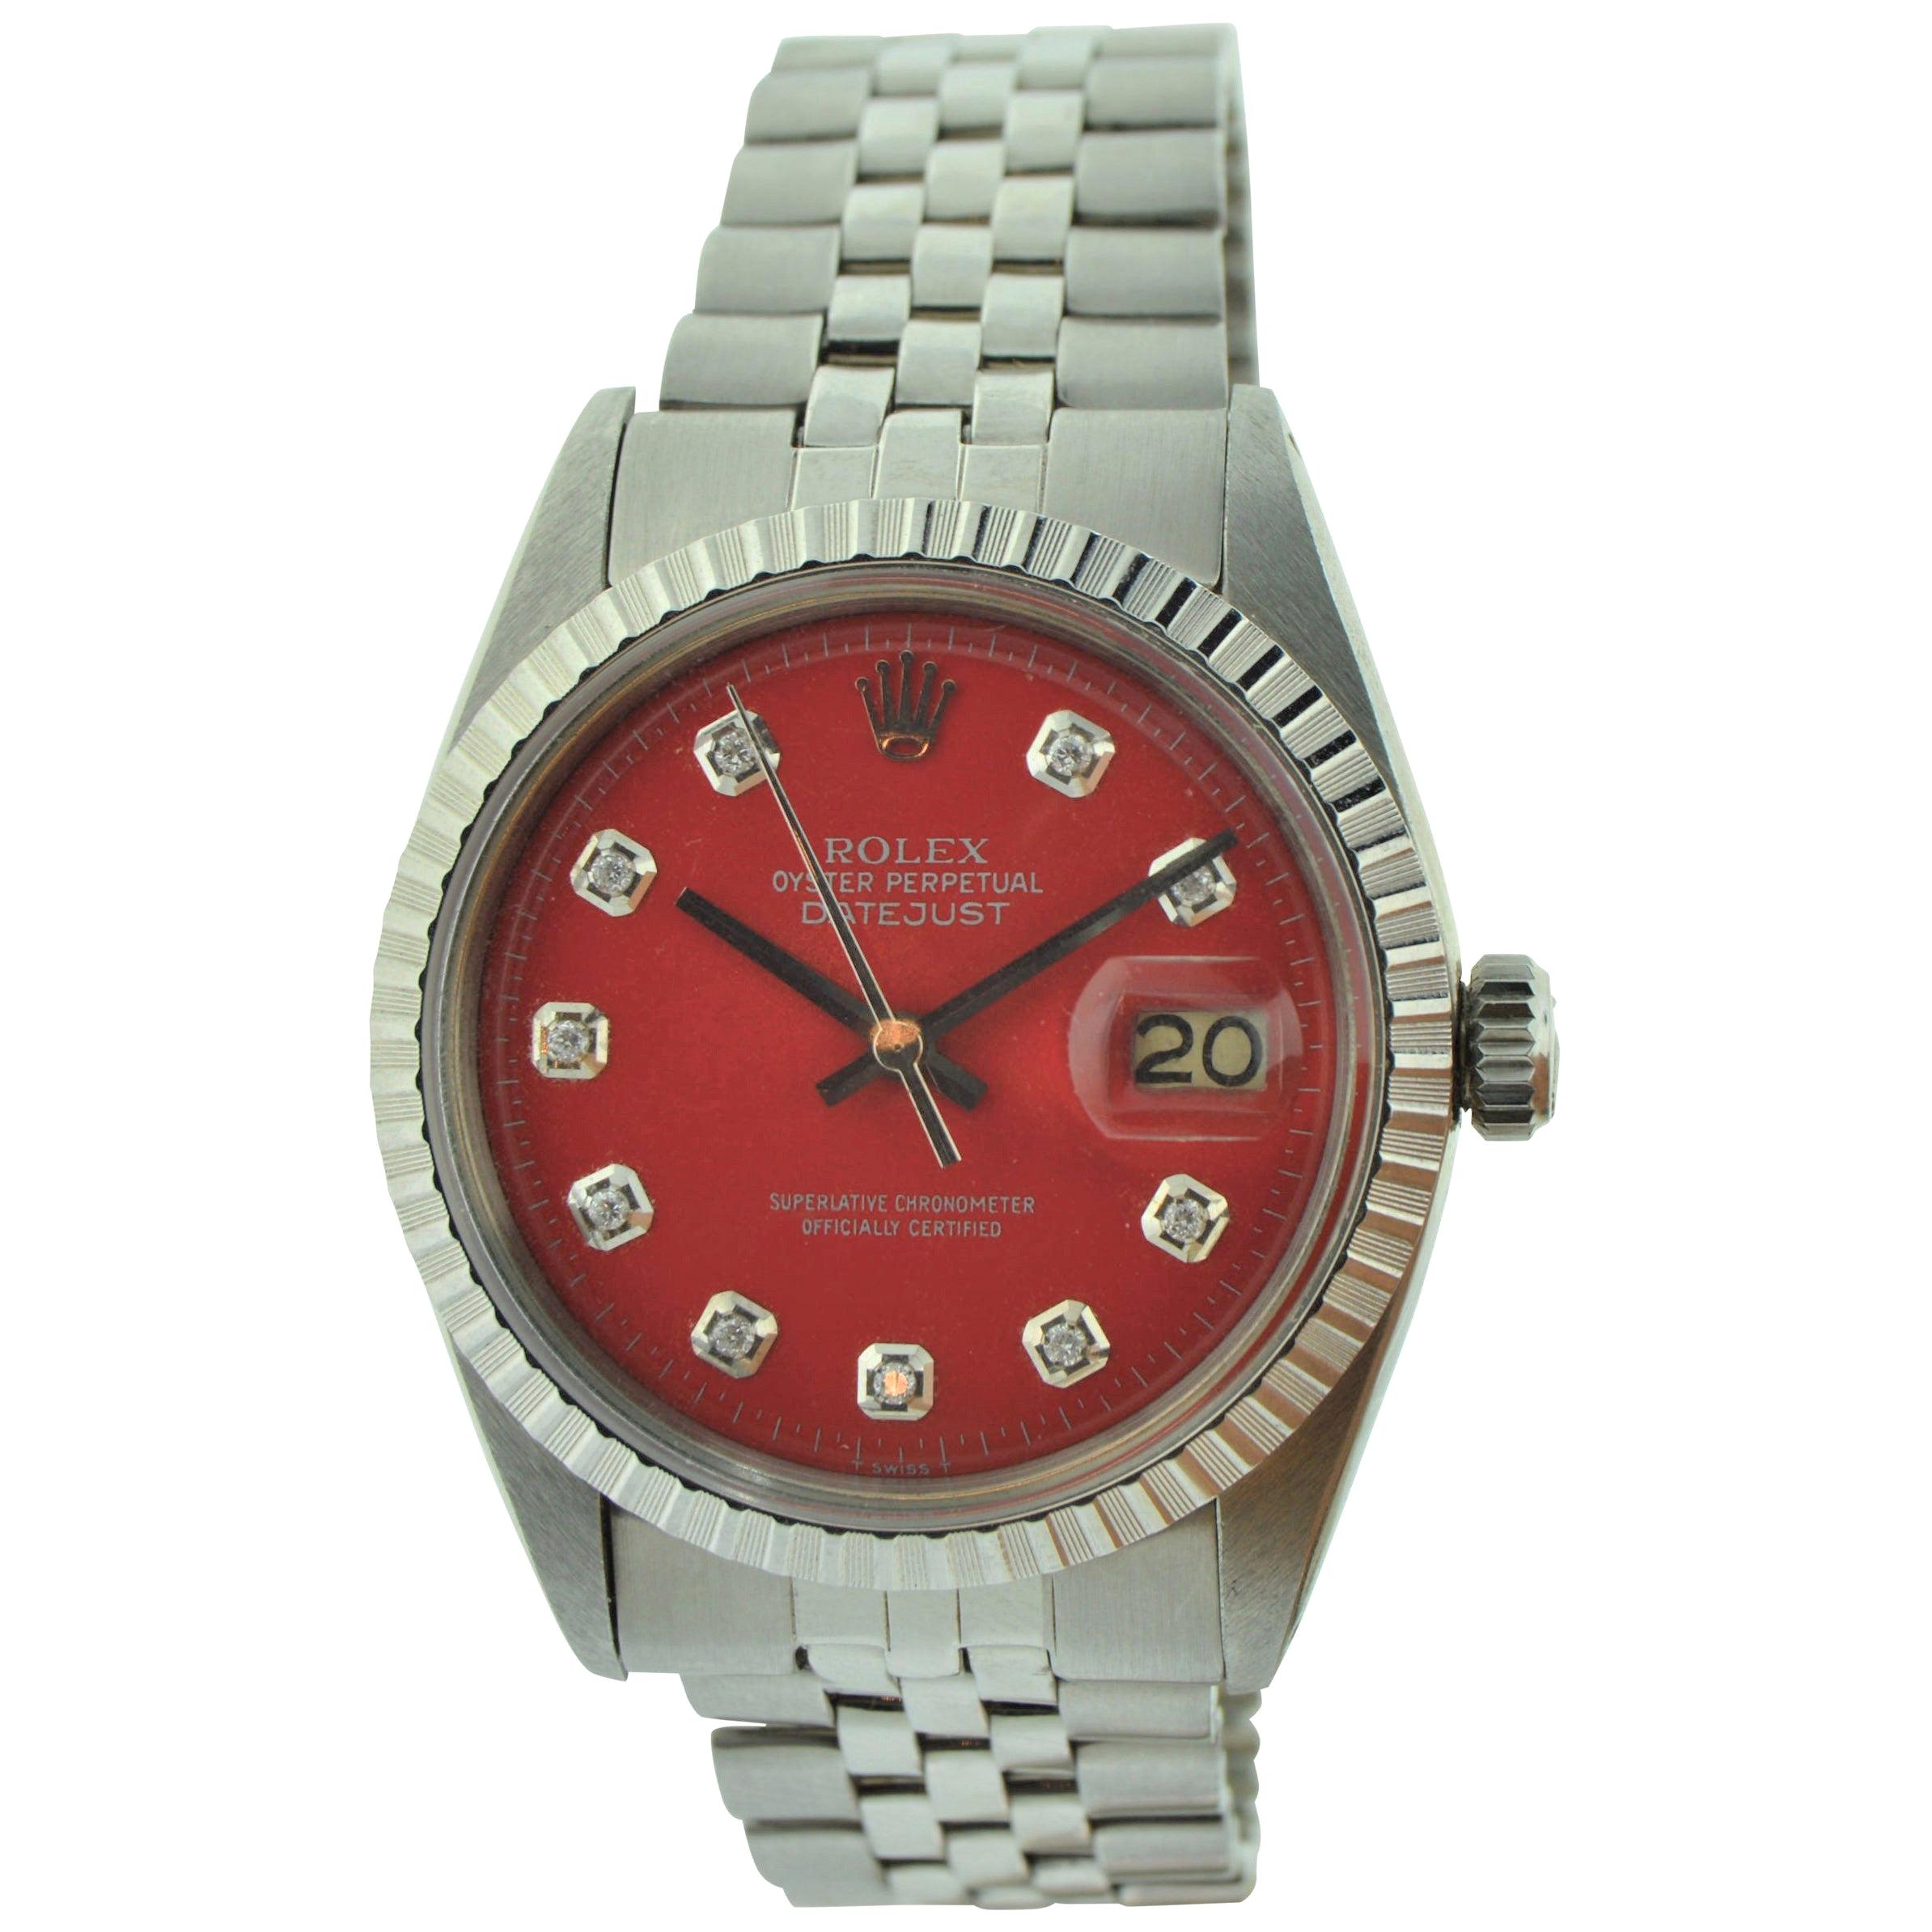 Rolex Stainless Steel Datejust Ref 1603 Custom Red Diamond Dial, Dated 1977